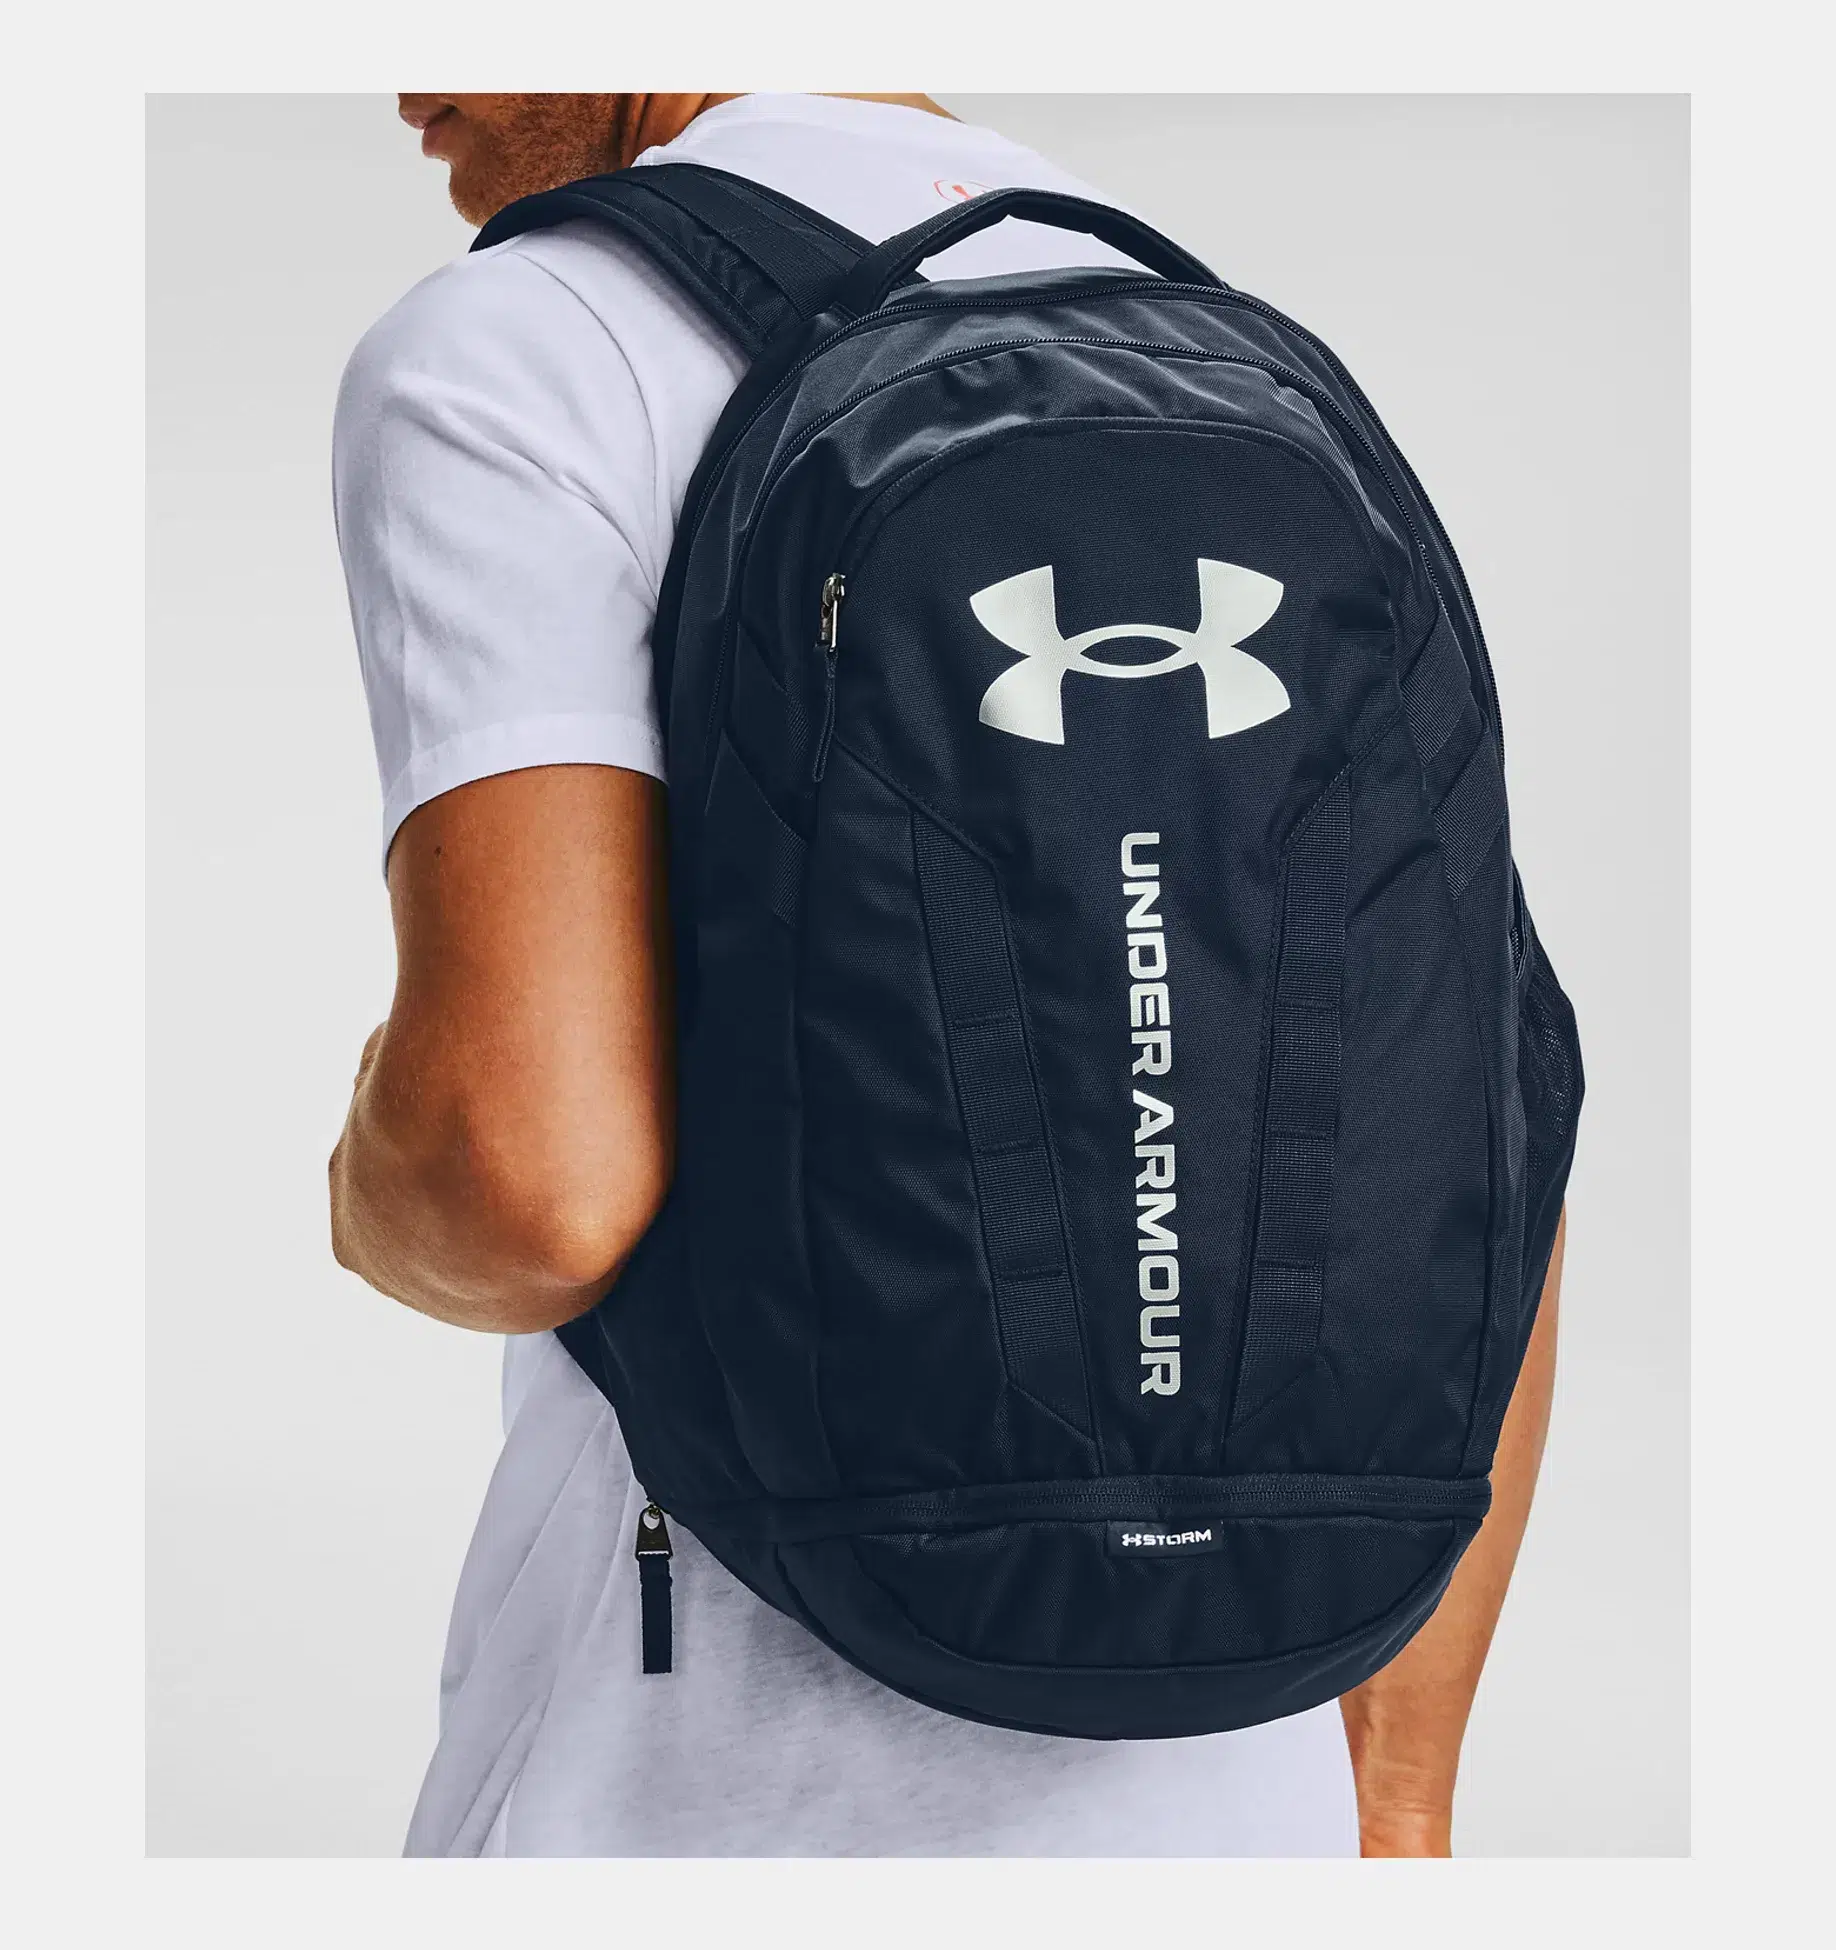 Under Armour - Hustle 5.0 Backpack - Navy thumbnail